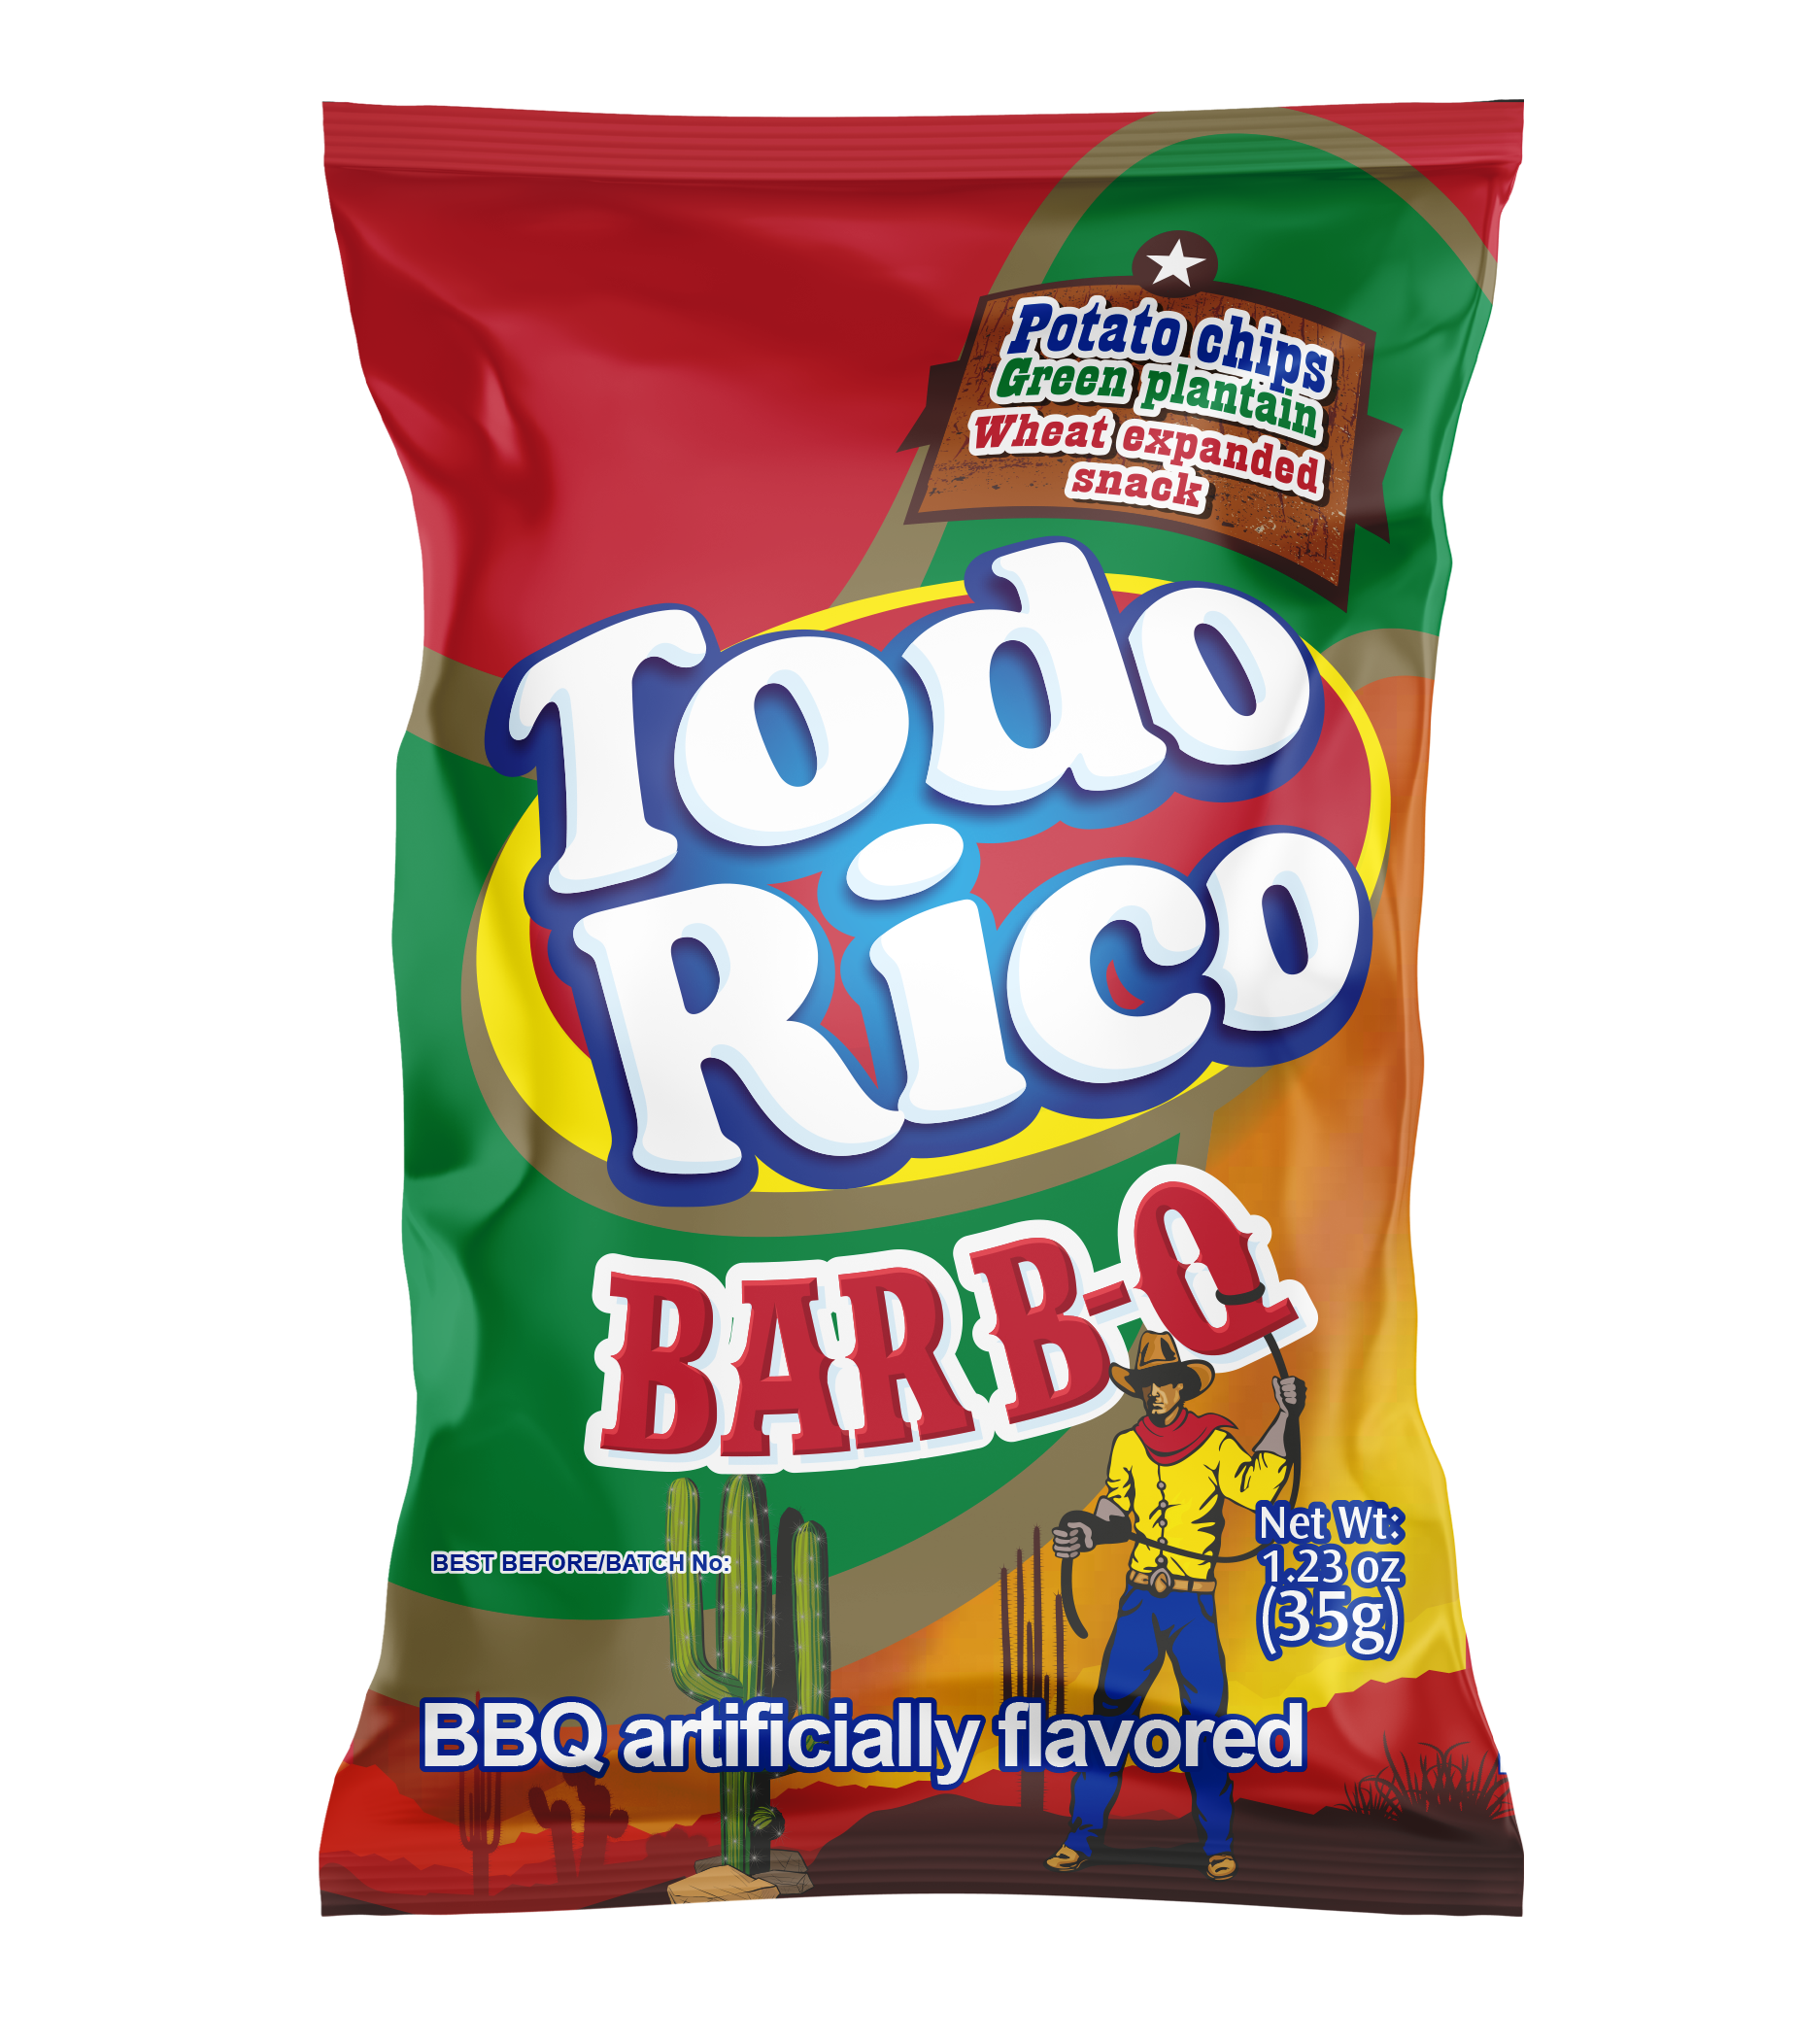 Super Ricas Todo Rico potato, plantain and wheat expanded snack chips, chilli, lime natural flavors - 12 Units